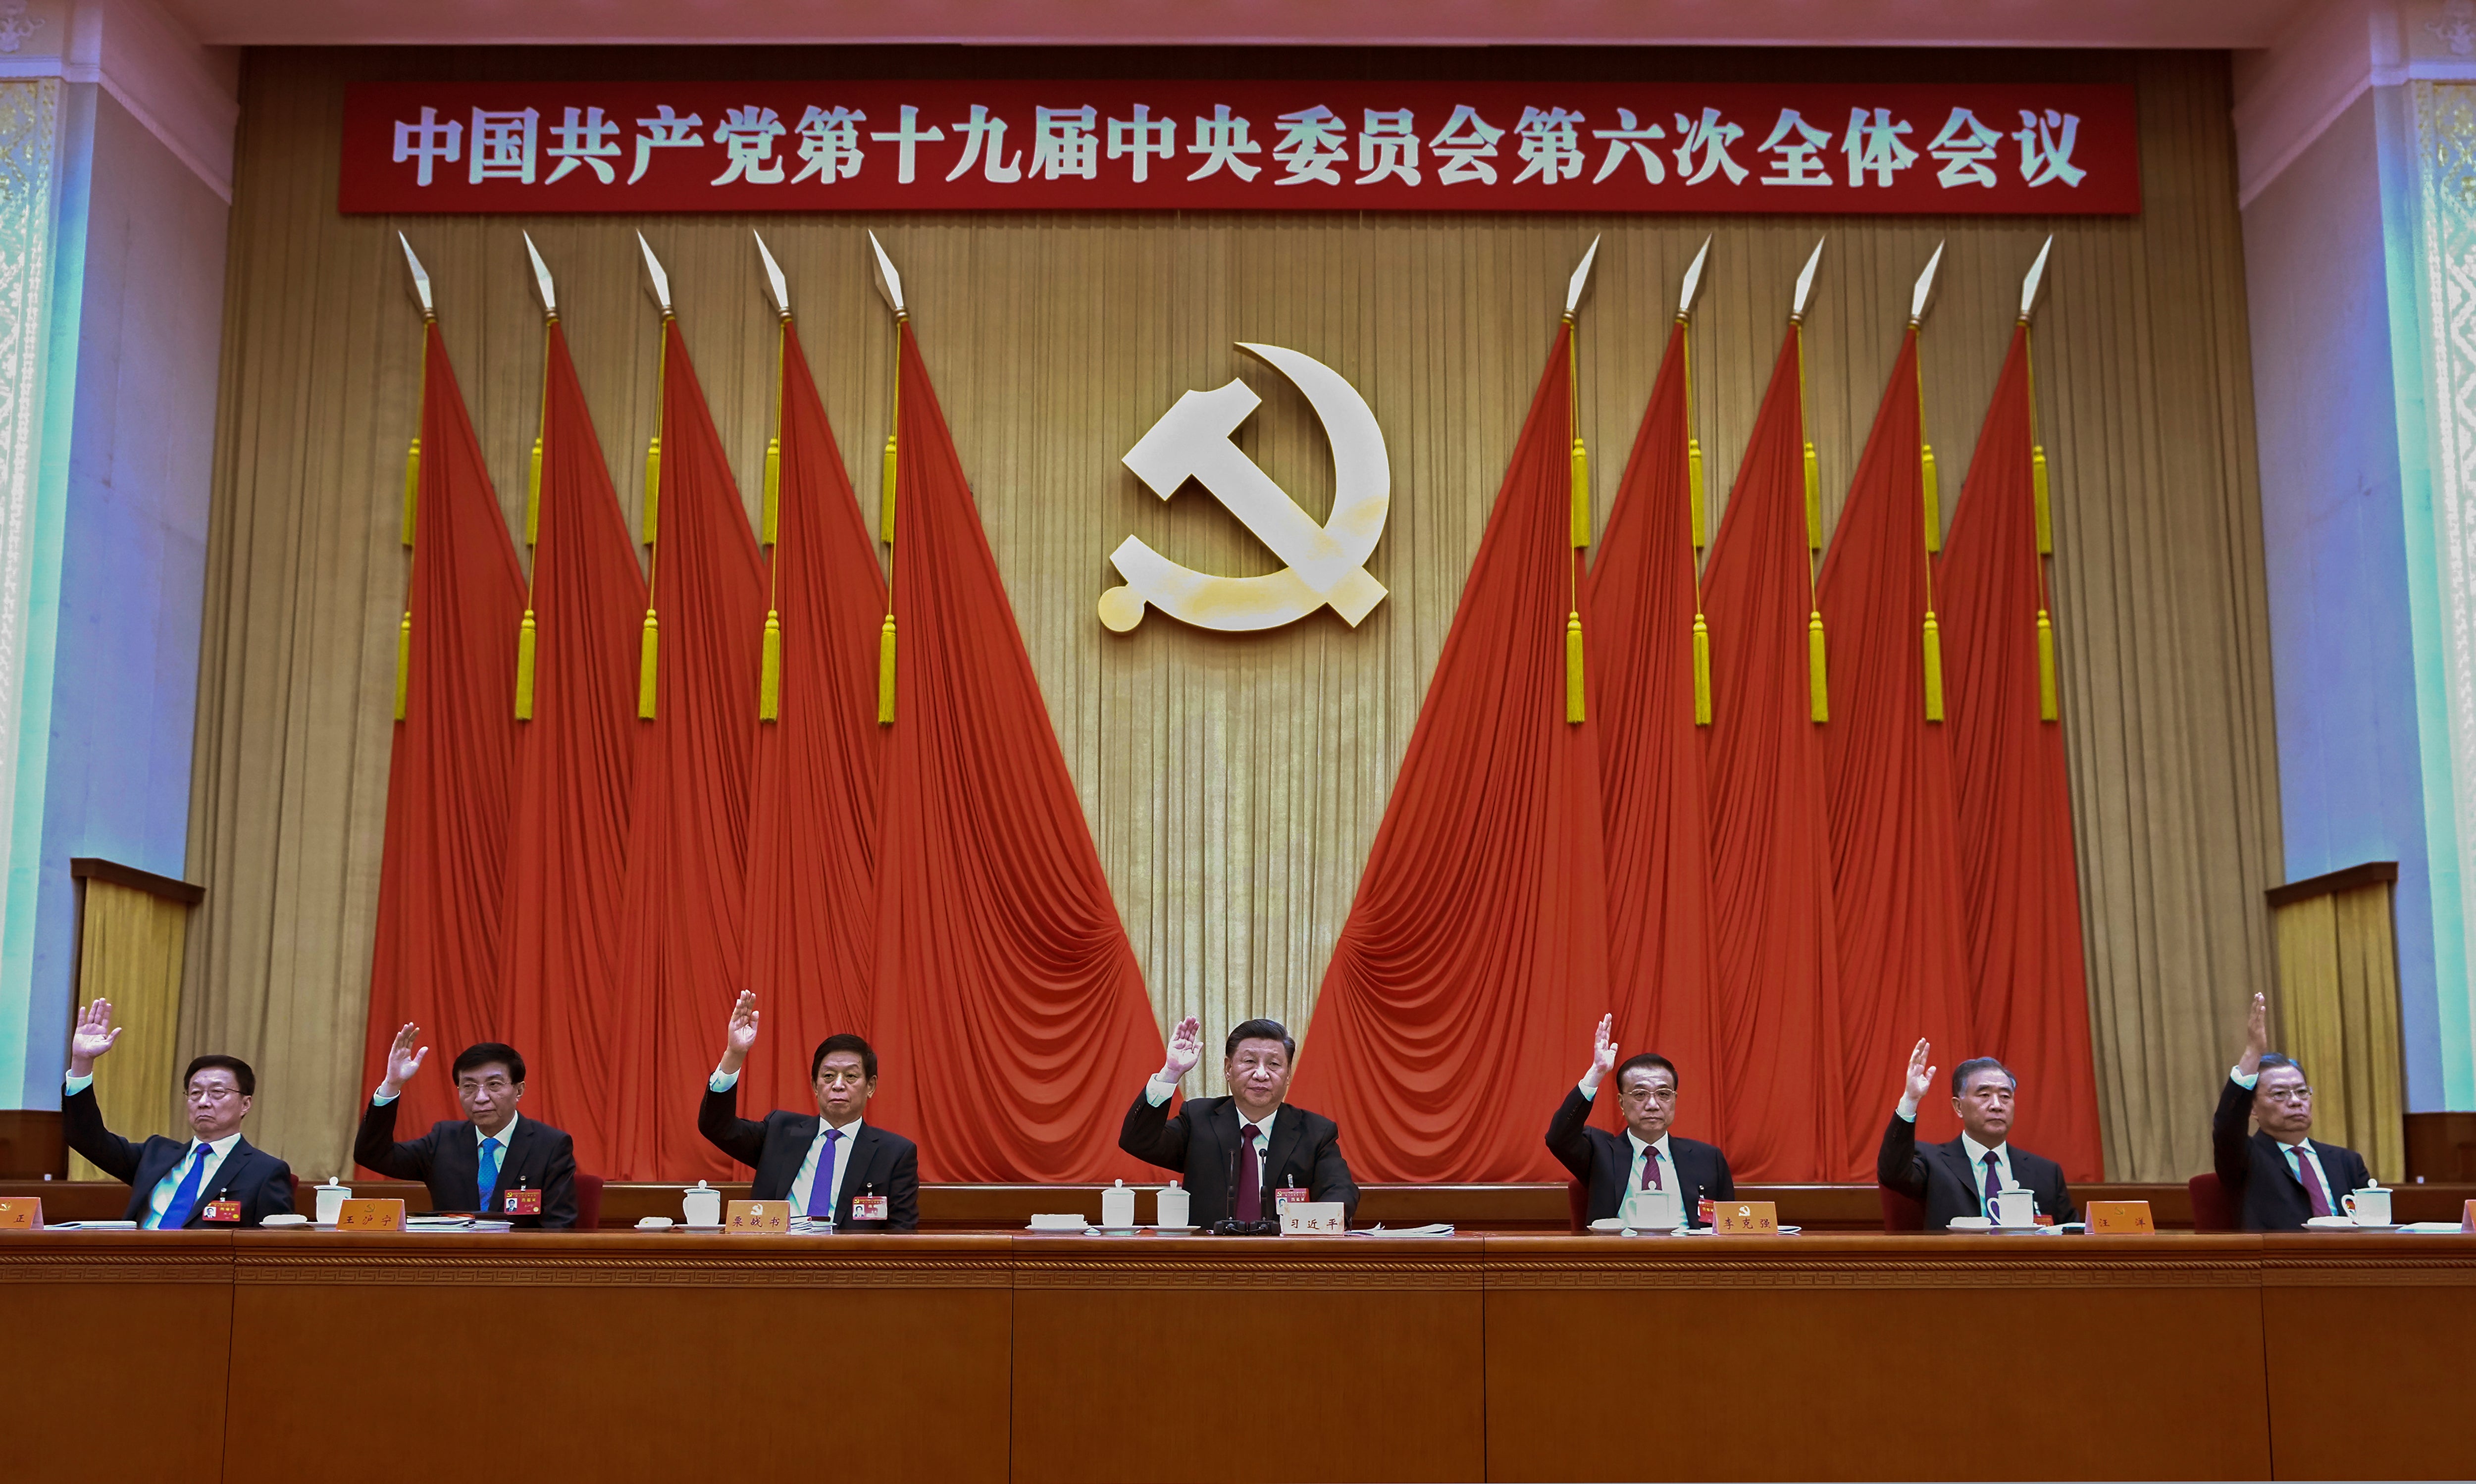 Chinese Communist Party members and leader Xi Jinping at the Sixth Plenum